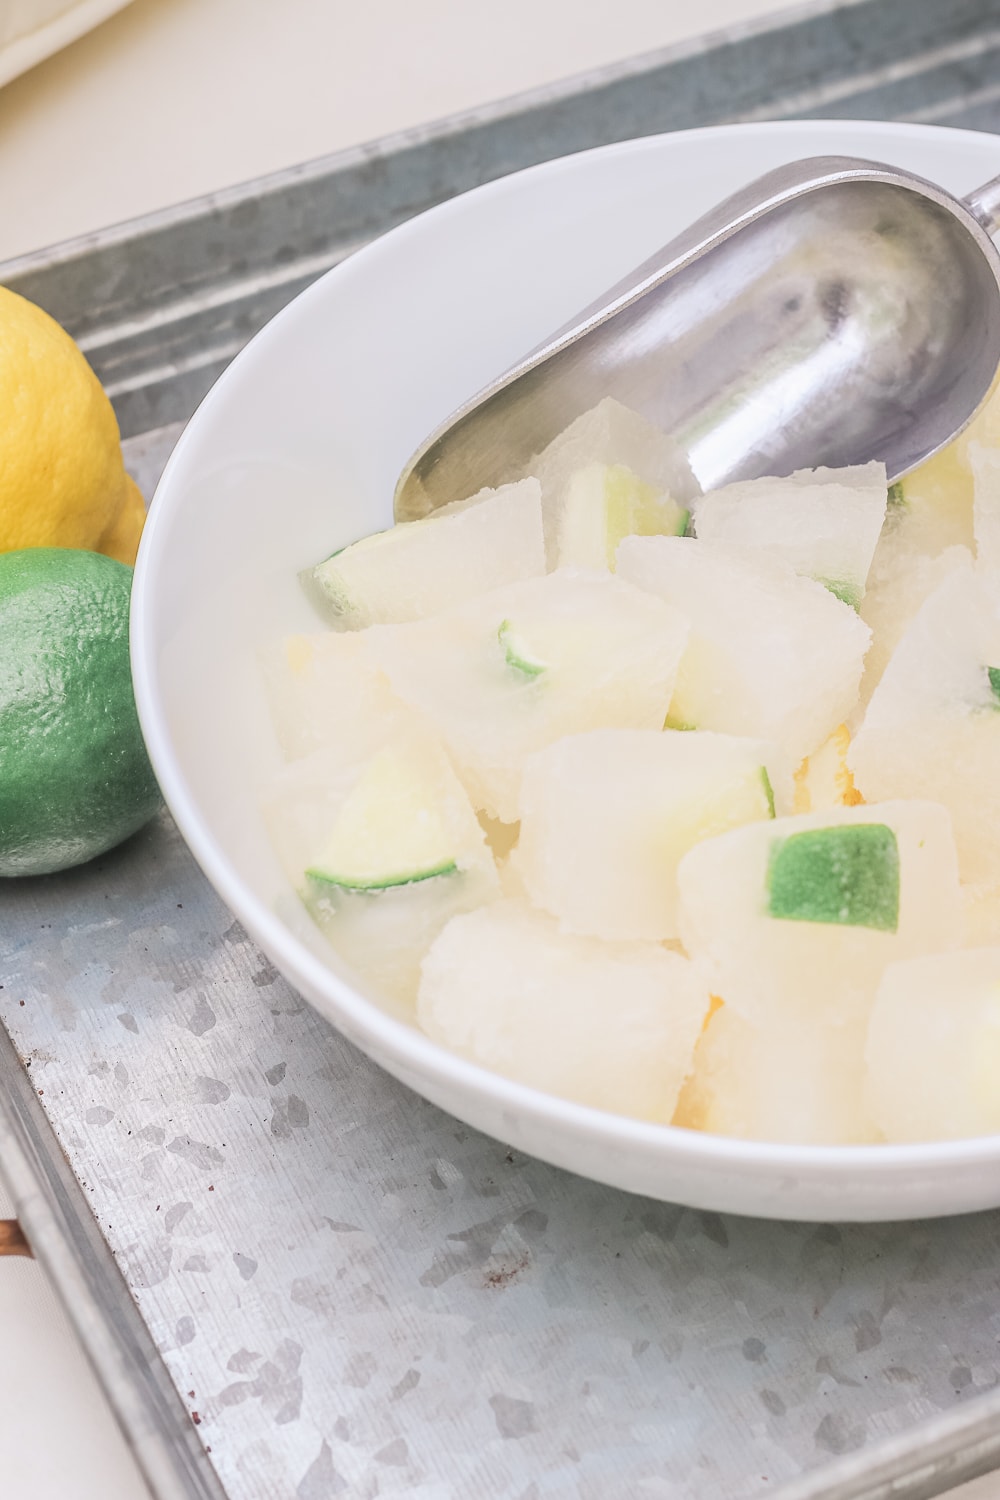 Blogger Stephanie Ziajka shows how to make lemon juice ice cubes in today's post